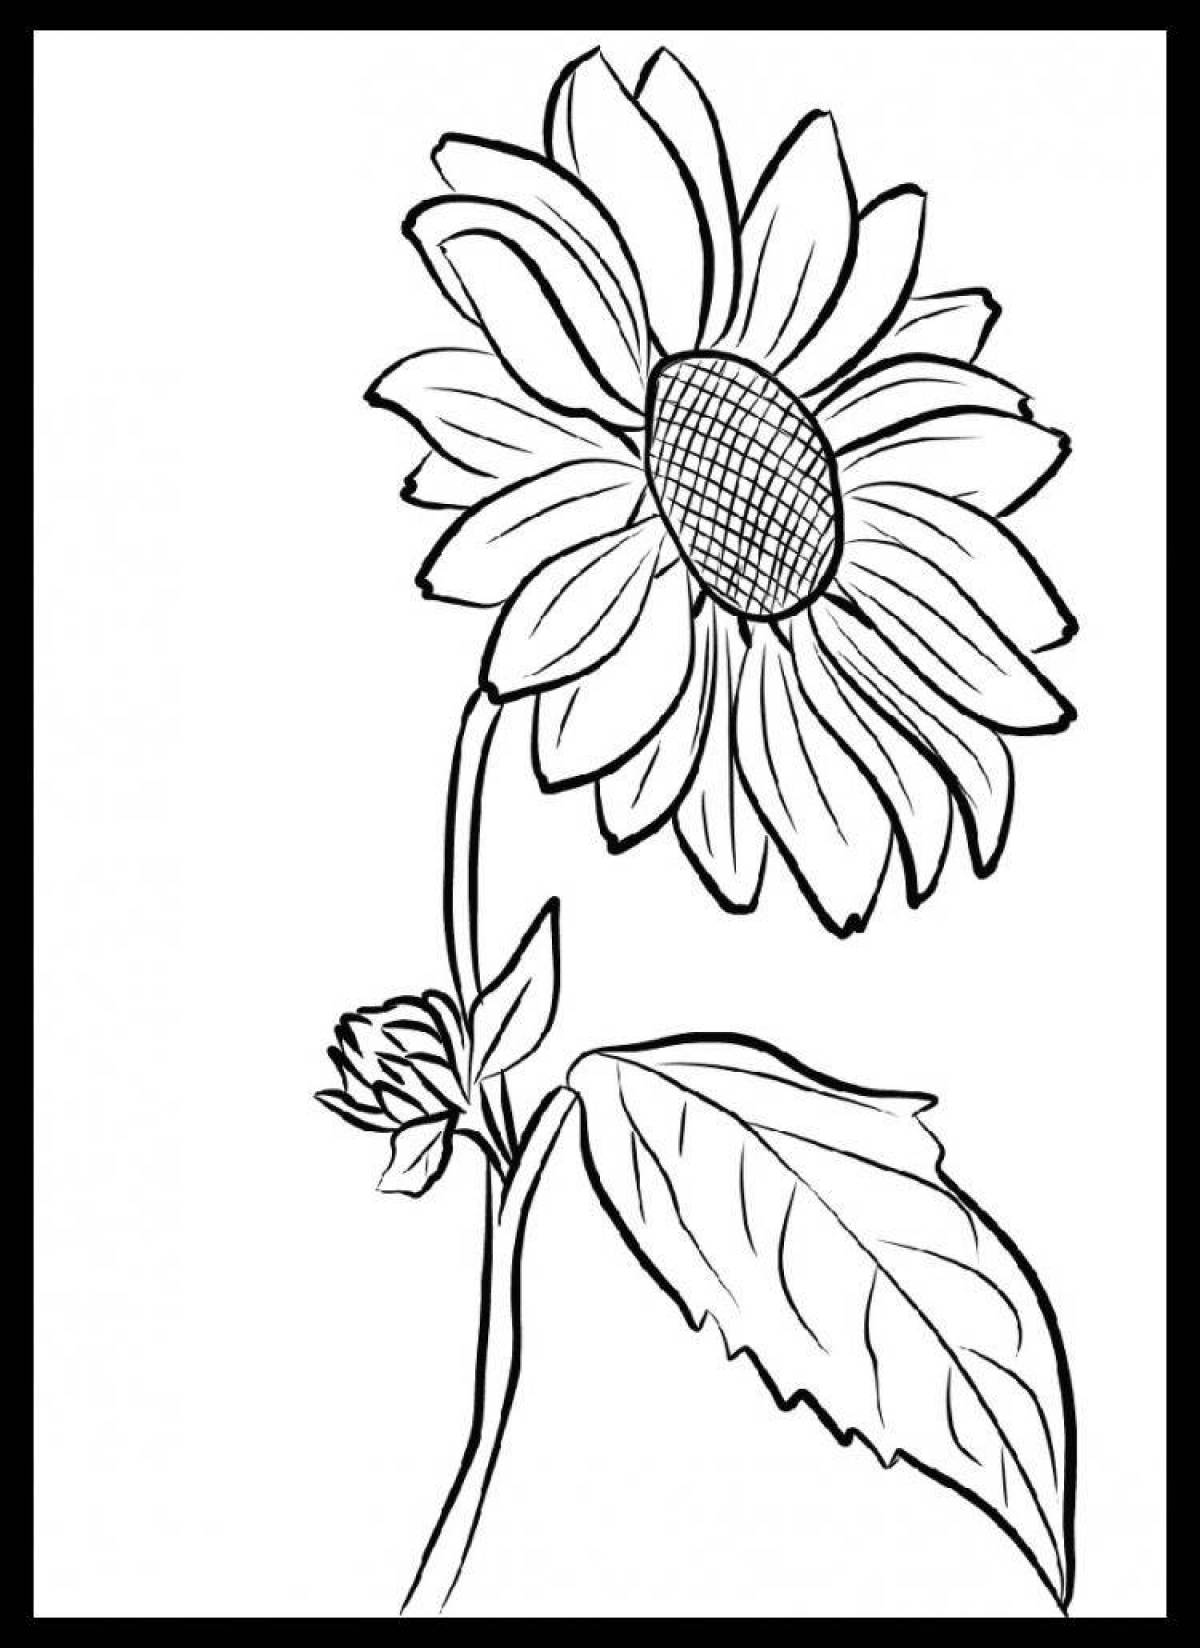 Refreshing sunflower coloring page for kids